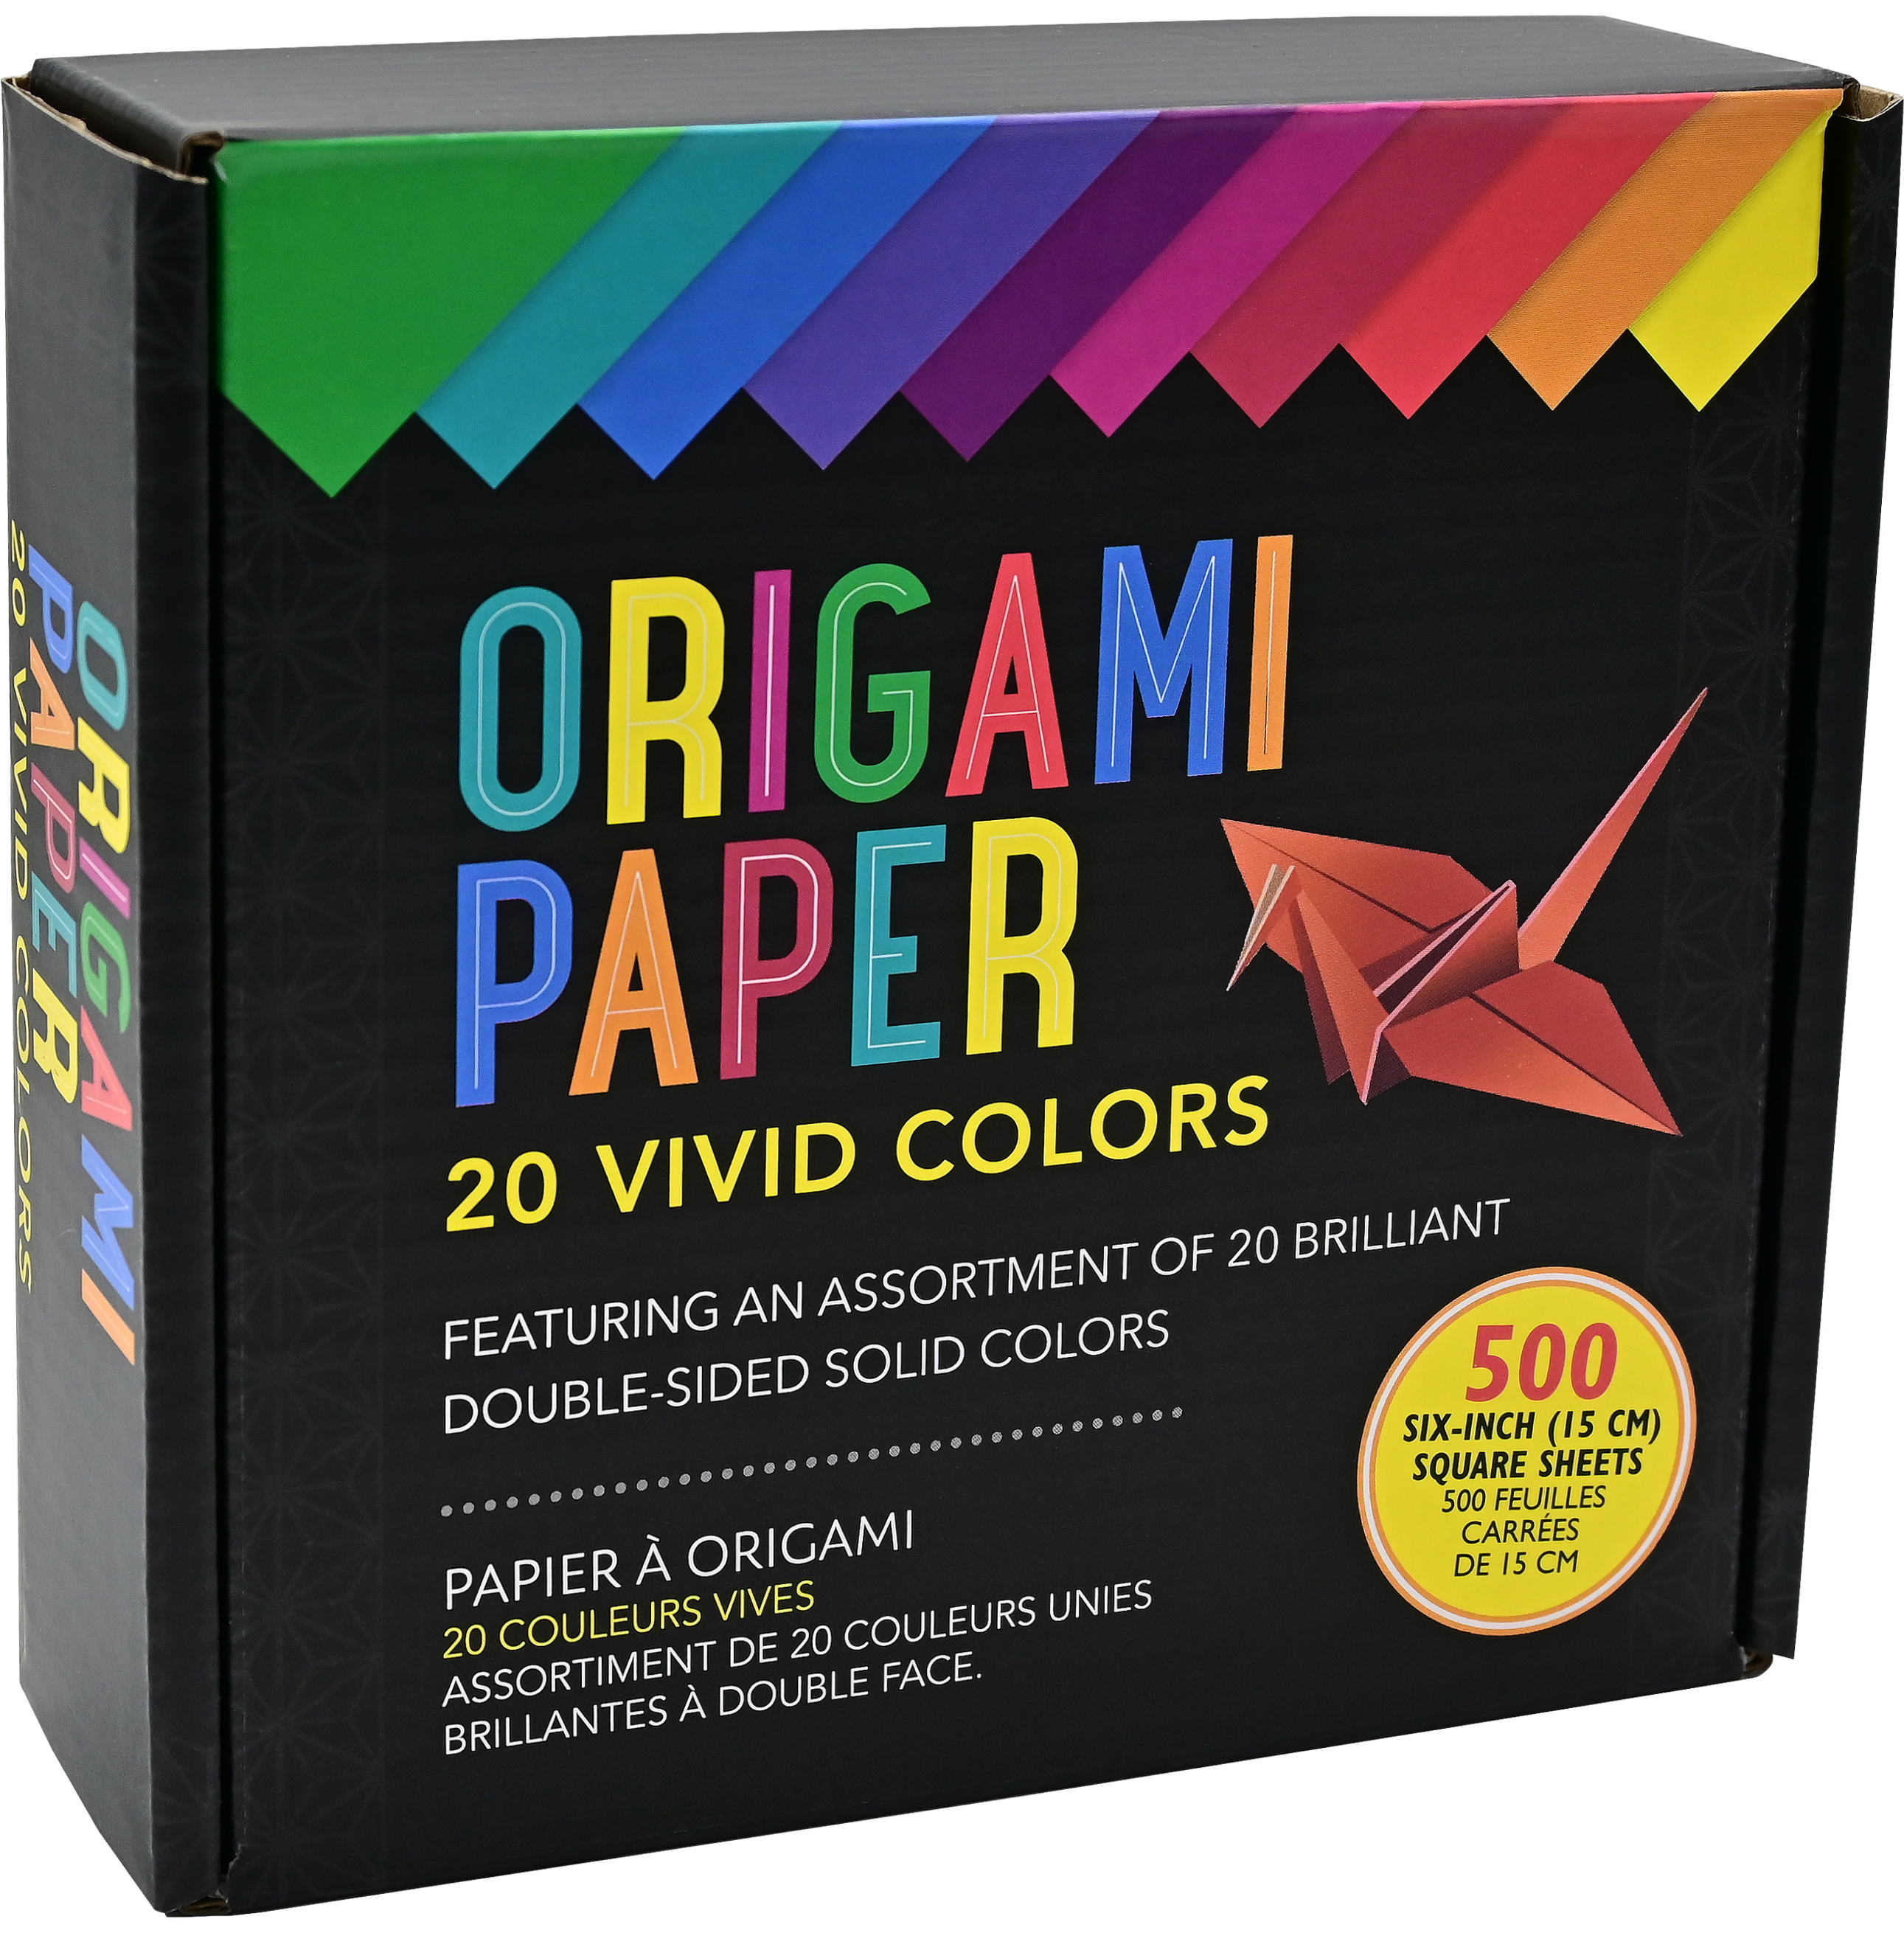 Origami Book For Kids: 70 Amazing Paper Folding Projects With